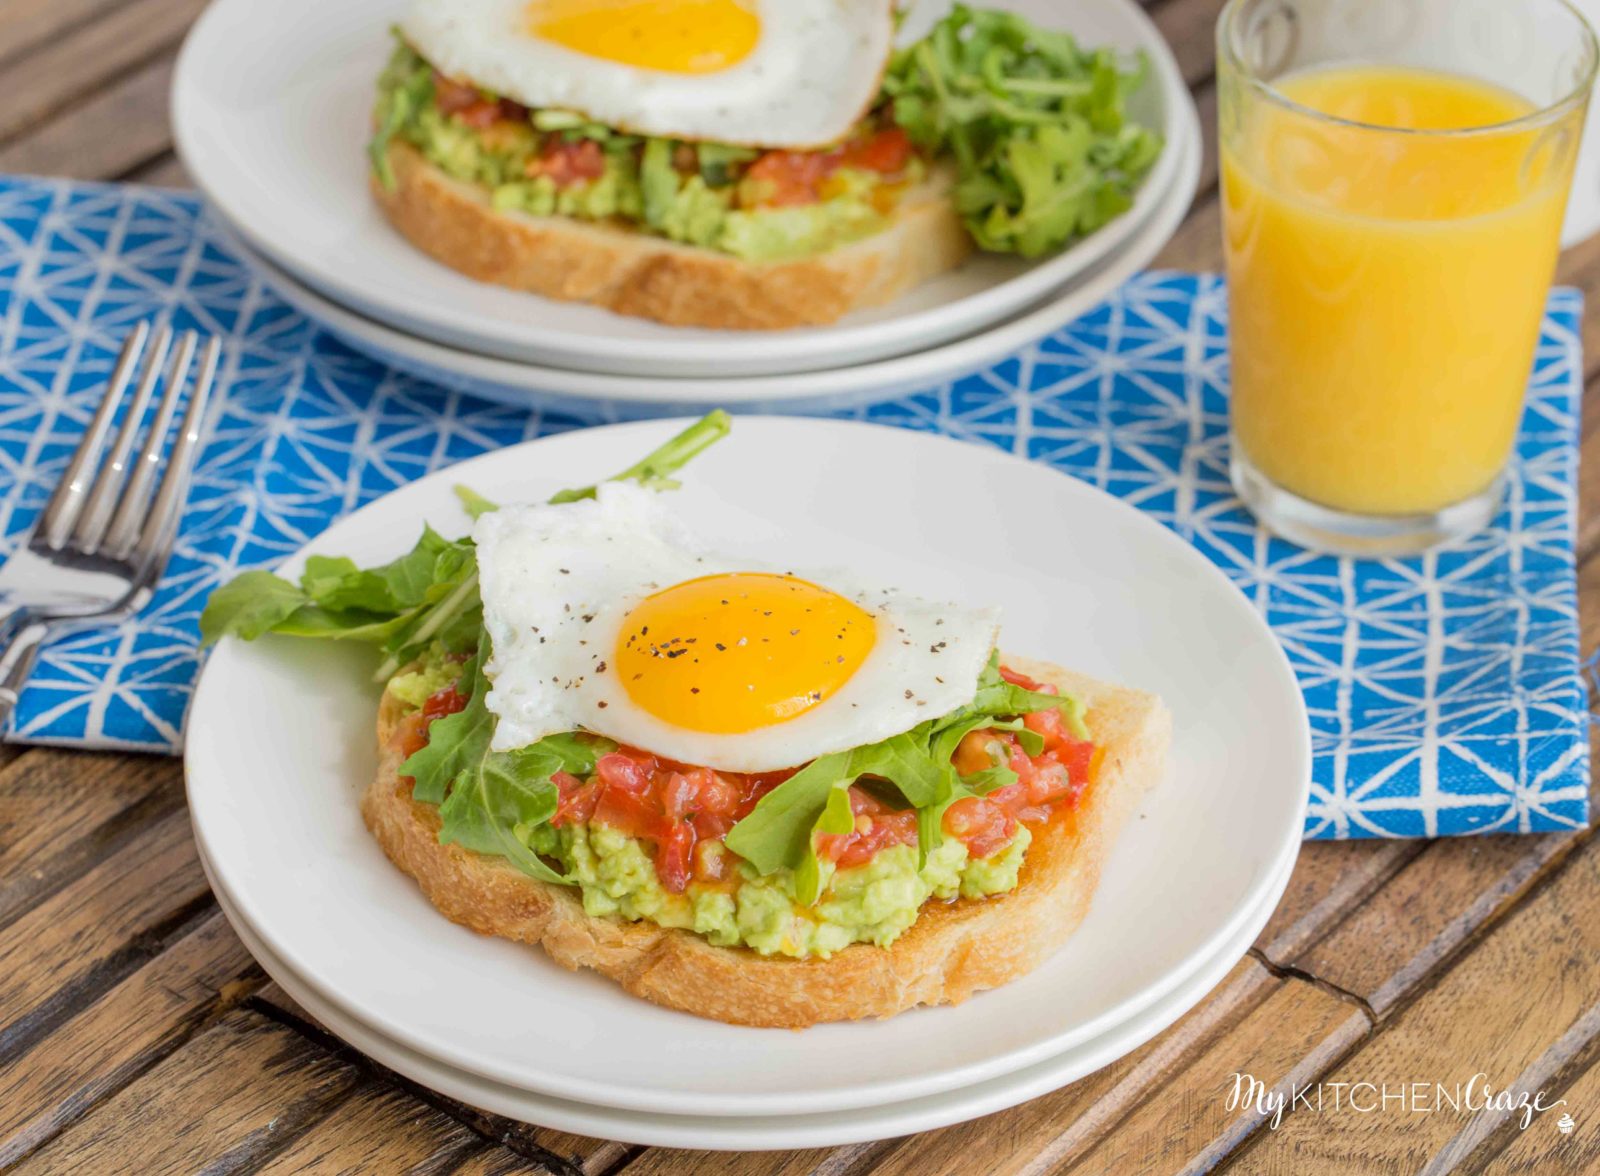 Bruschetta Egg Avocado Toast ~ mykitchencraze.com ~ Sourdough toast loaded with avocado, bruschetta and arugula, then topped with an egg. Perfect way to start your morning!